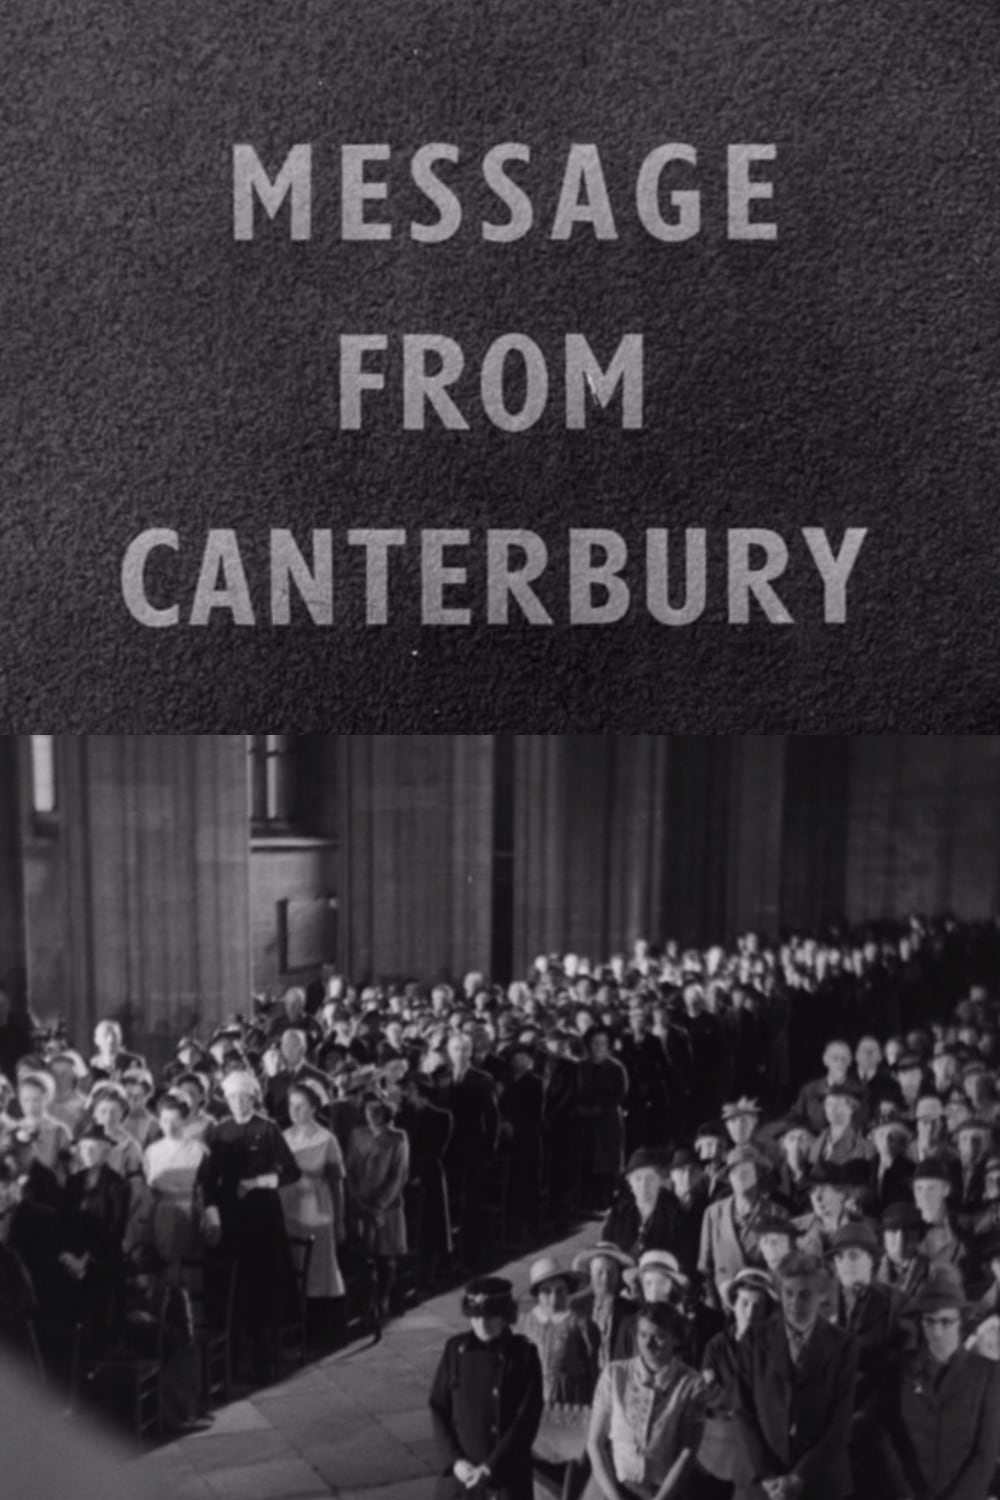 Message from Canterbury